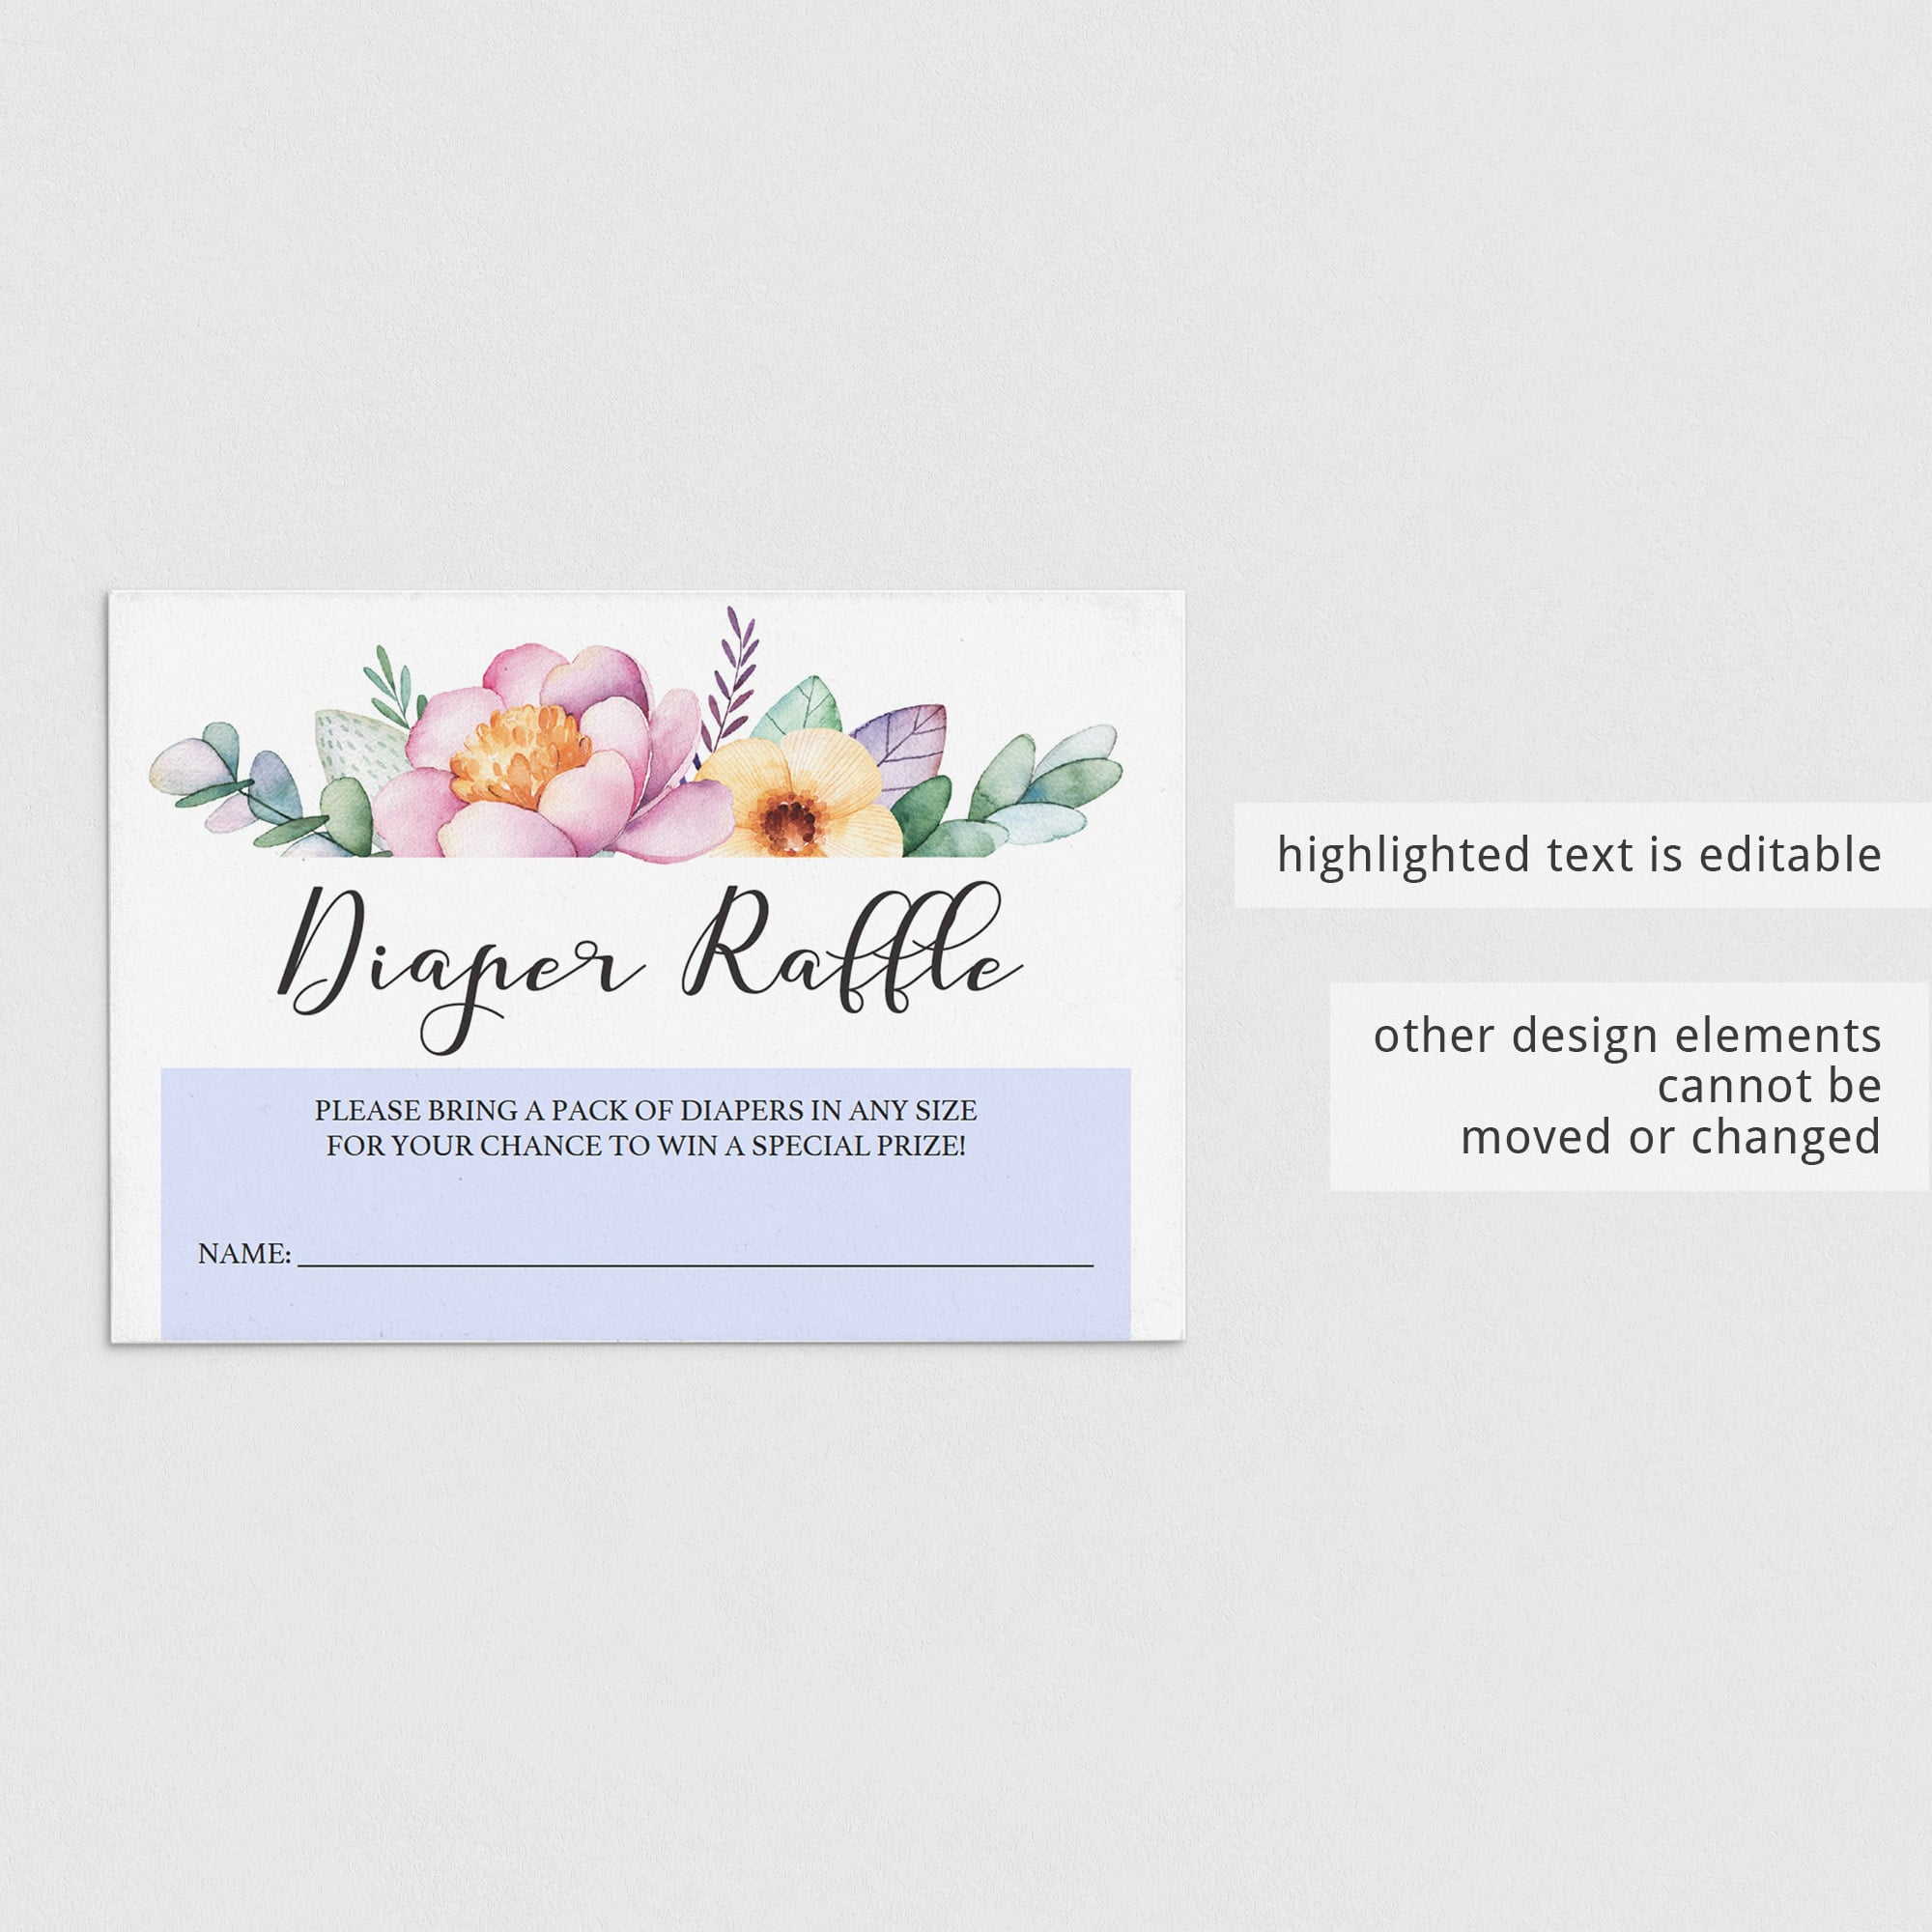 Editable diaper raffle tickets for unicorn baby shower by LittleSizzle